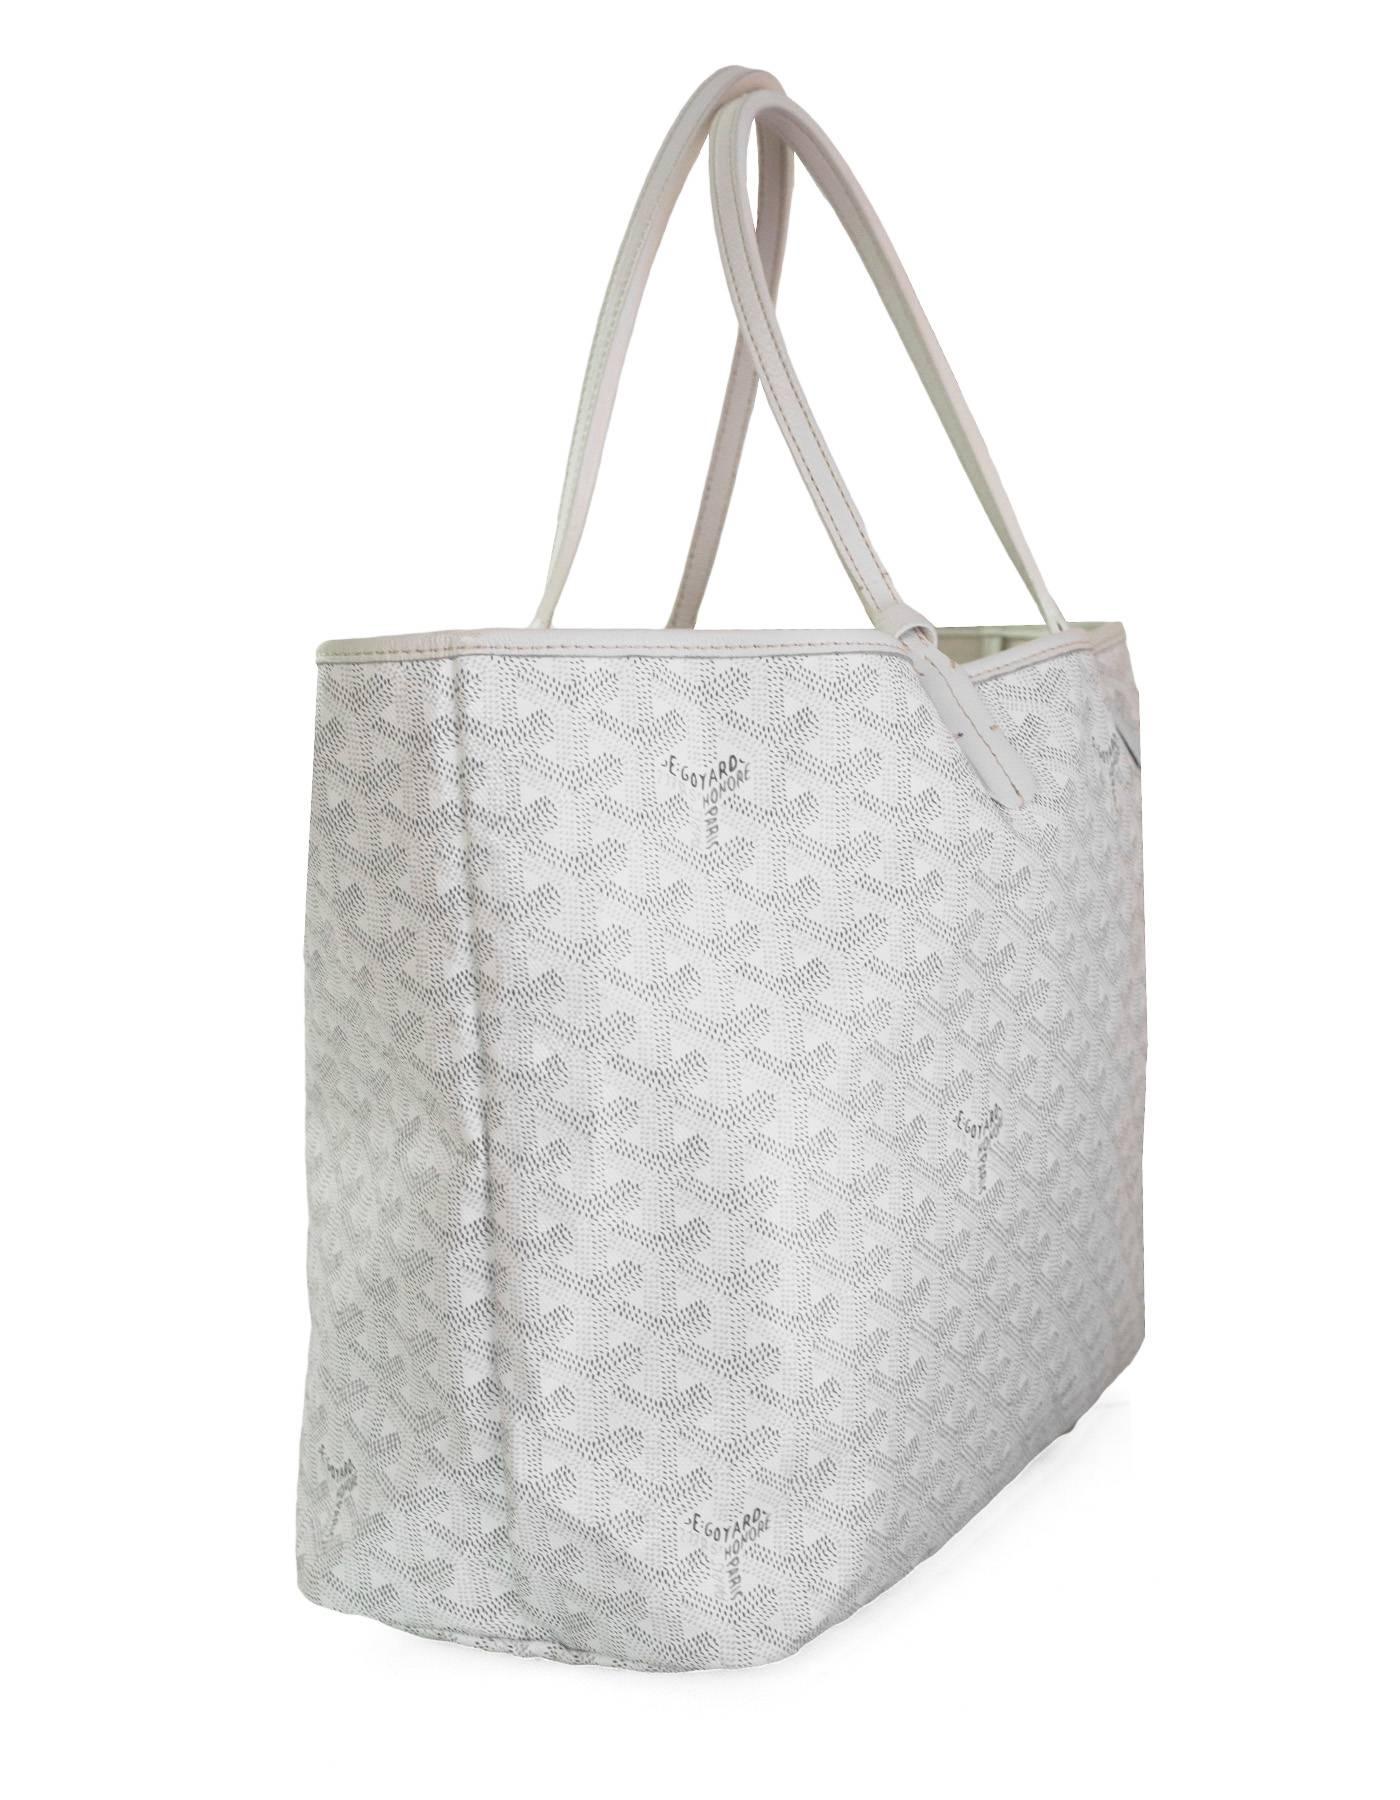 Goyard White St. Louis PM Chevron Tote

Made In: France
Colors: White
Hardware: Silvertone 
Materials: Coated canvas, leather
Lining: Cream textile
Closure/Opening: Open top
Exterior Pockets: None
Interior Pockets: Small attached pochette
Overall